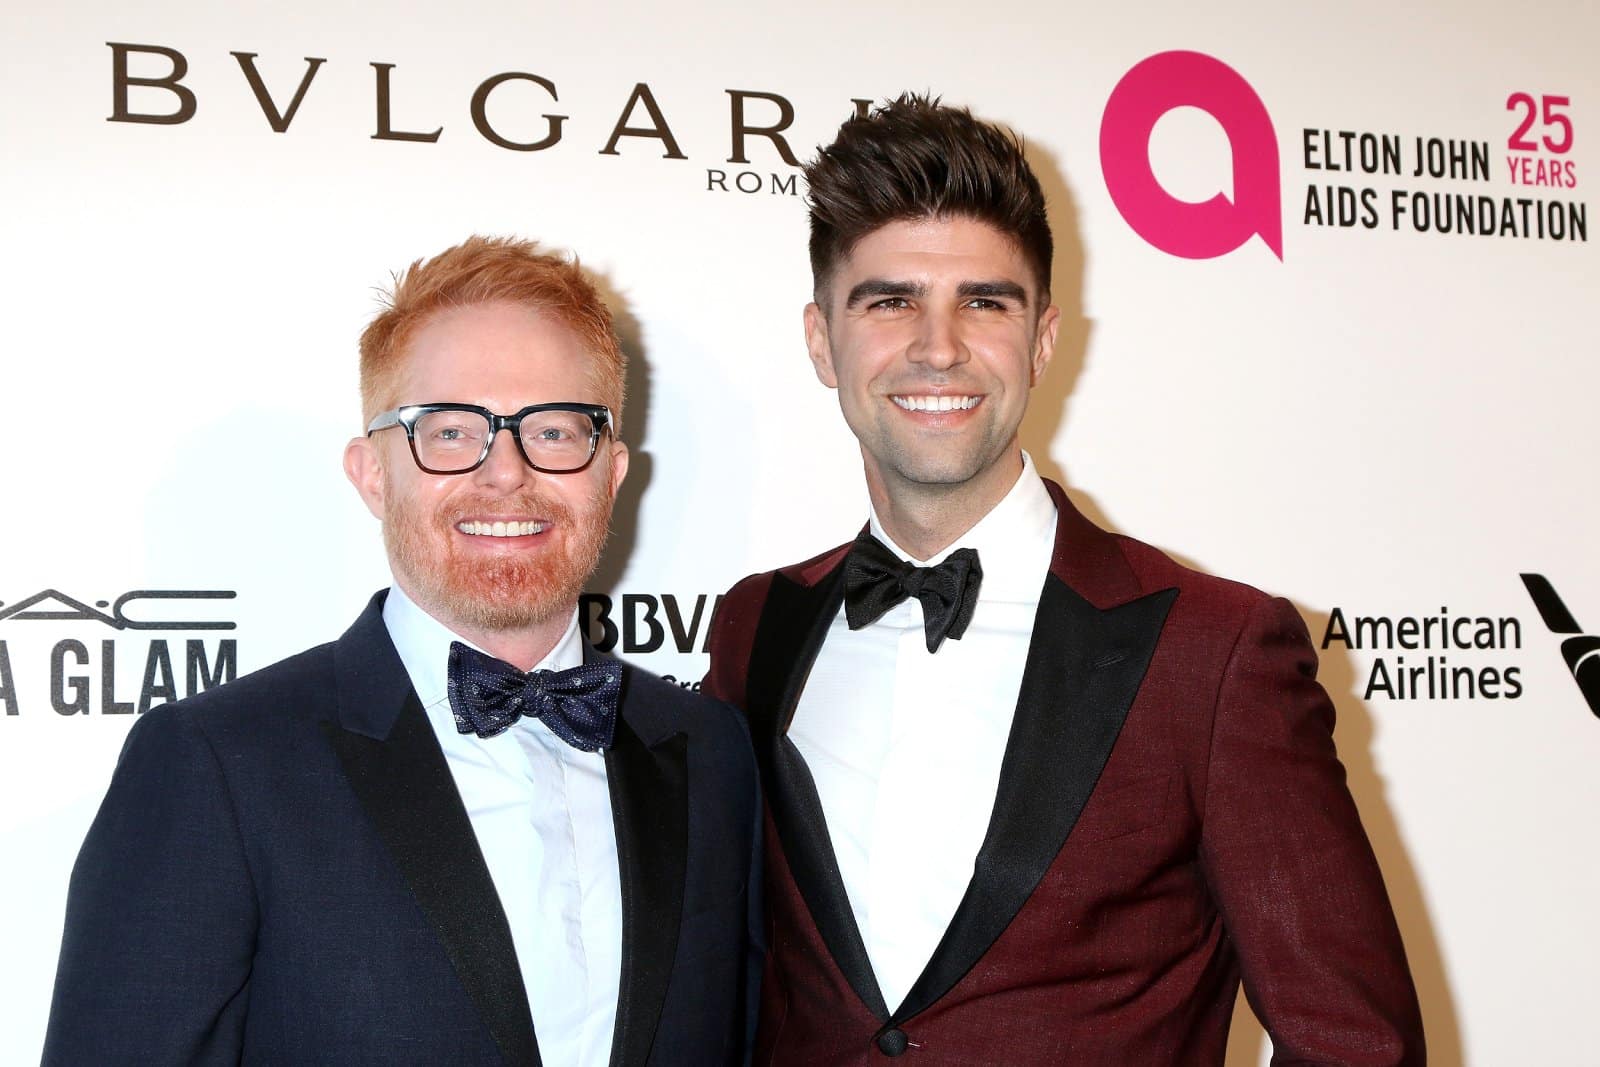 Image Credit: Shutterstock / Joe Seer <p><span>In his speech at the fifth anniversary of Tie The Knot in 2017, Jesse Tyler Ferguson discussed the impact of his marriage equality advocacy organization and the ongoing fight for LGBTQ+ rights globally.</span></p>